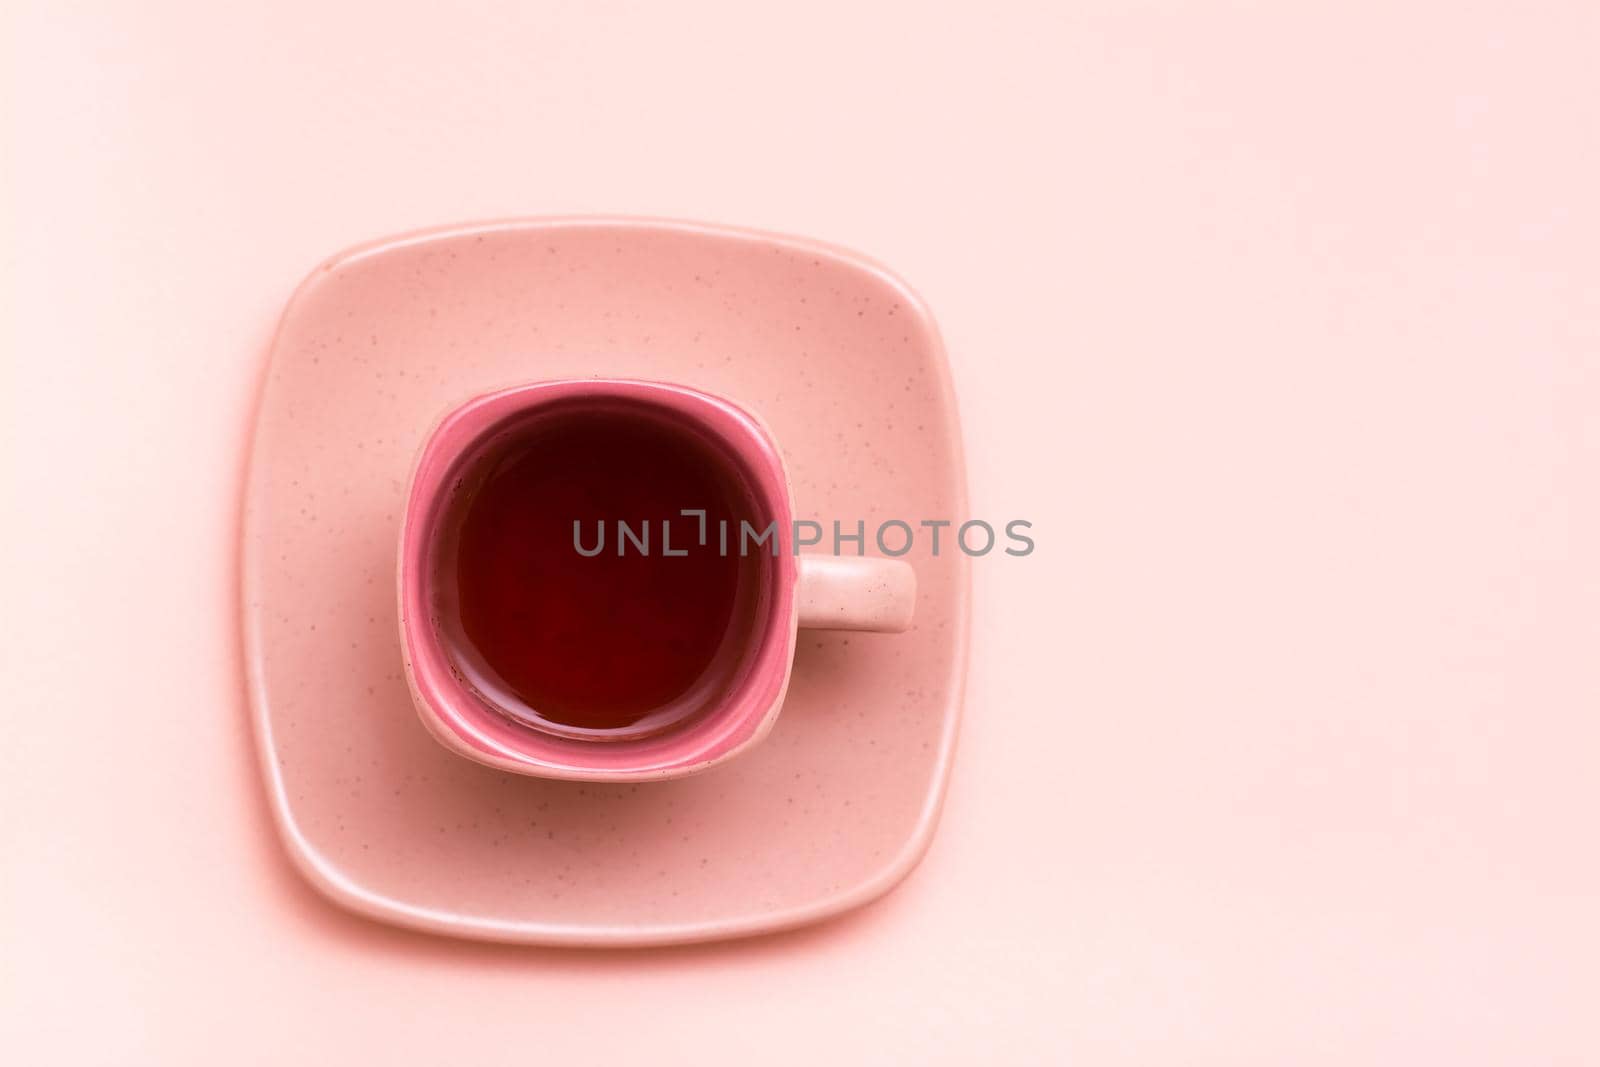 Pink concept. Square coffee cup with a pink drink on a saucer on a pink background. Top view